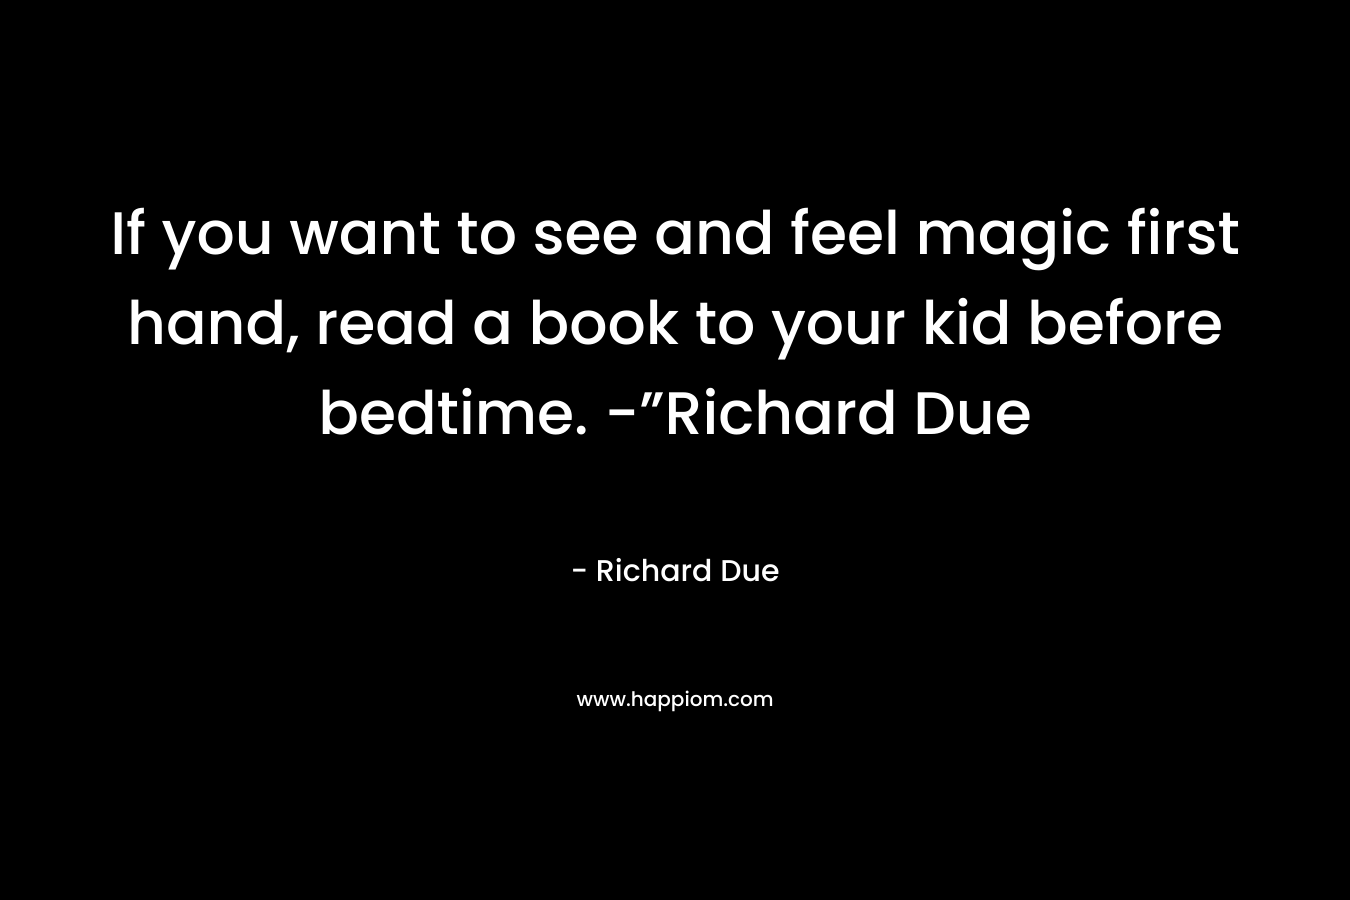 If you want to see and feel magic first hand, read a book to your kid before bedtime. -”Richard Due